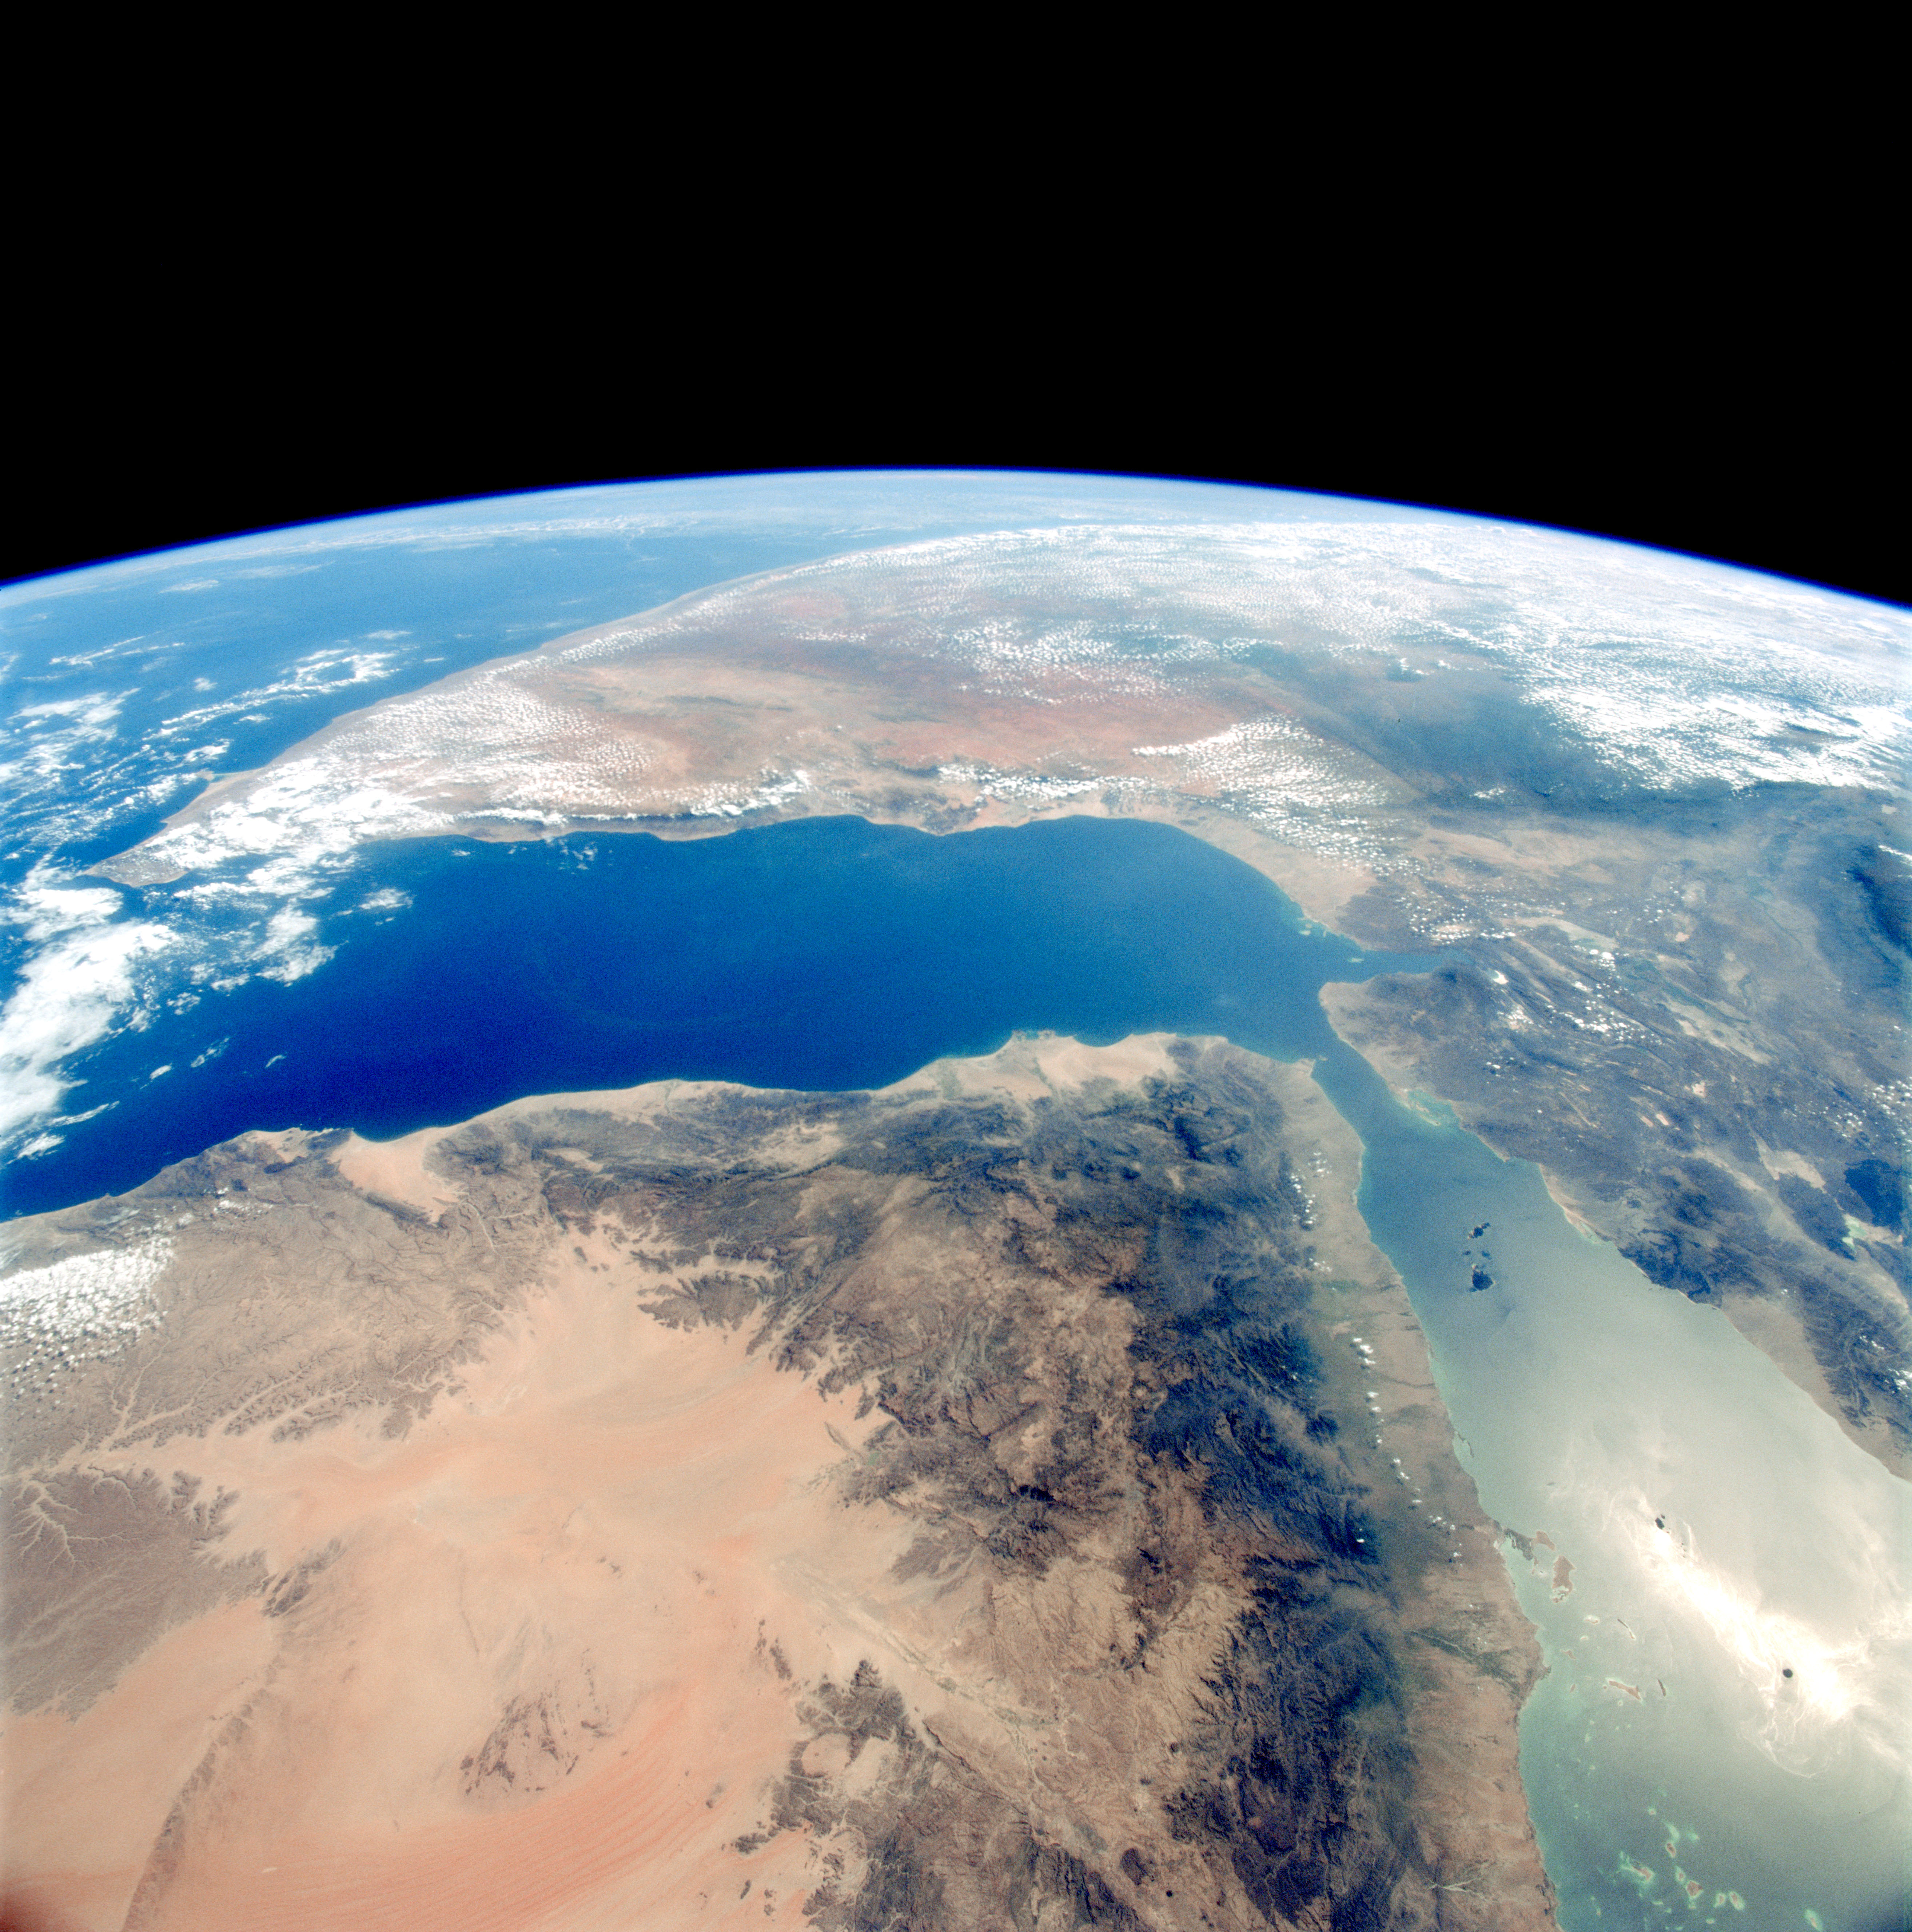 Photograph of Yemen and the Horn of Africa taken by the STS-95 crew